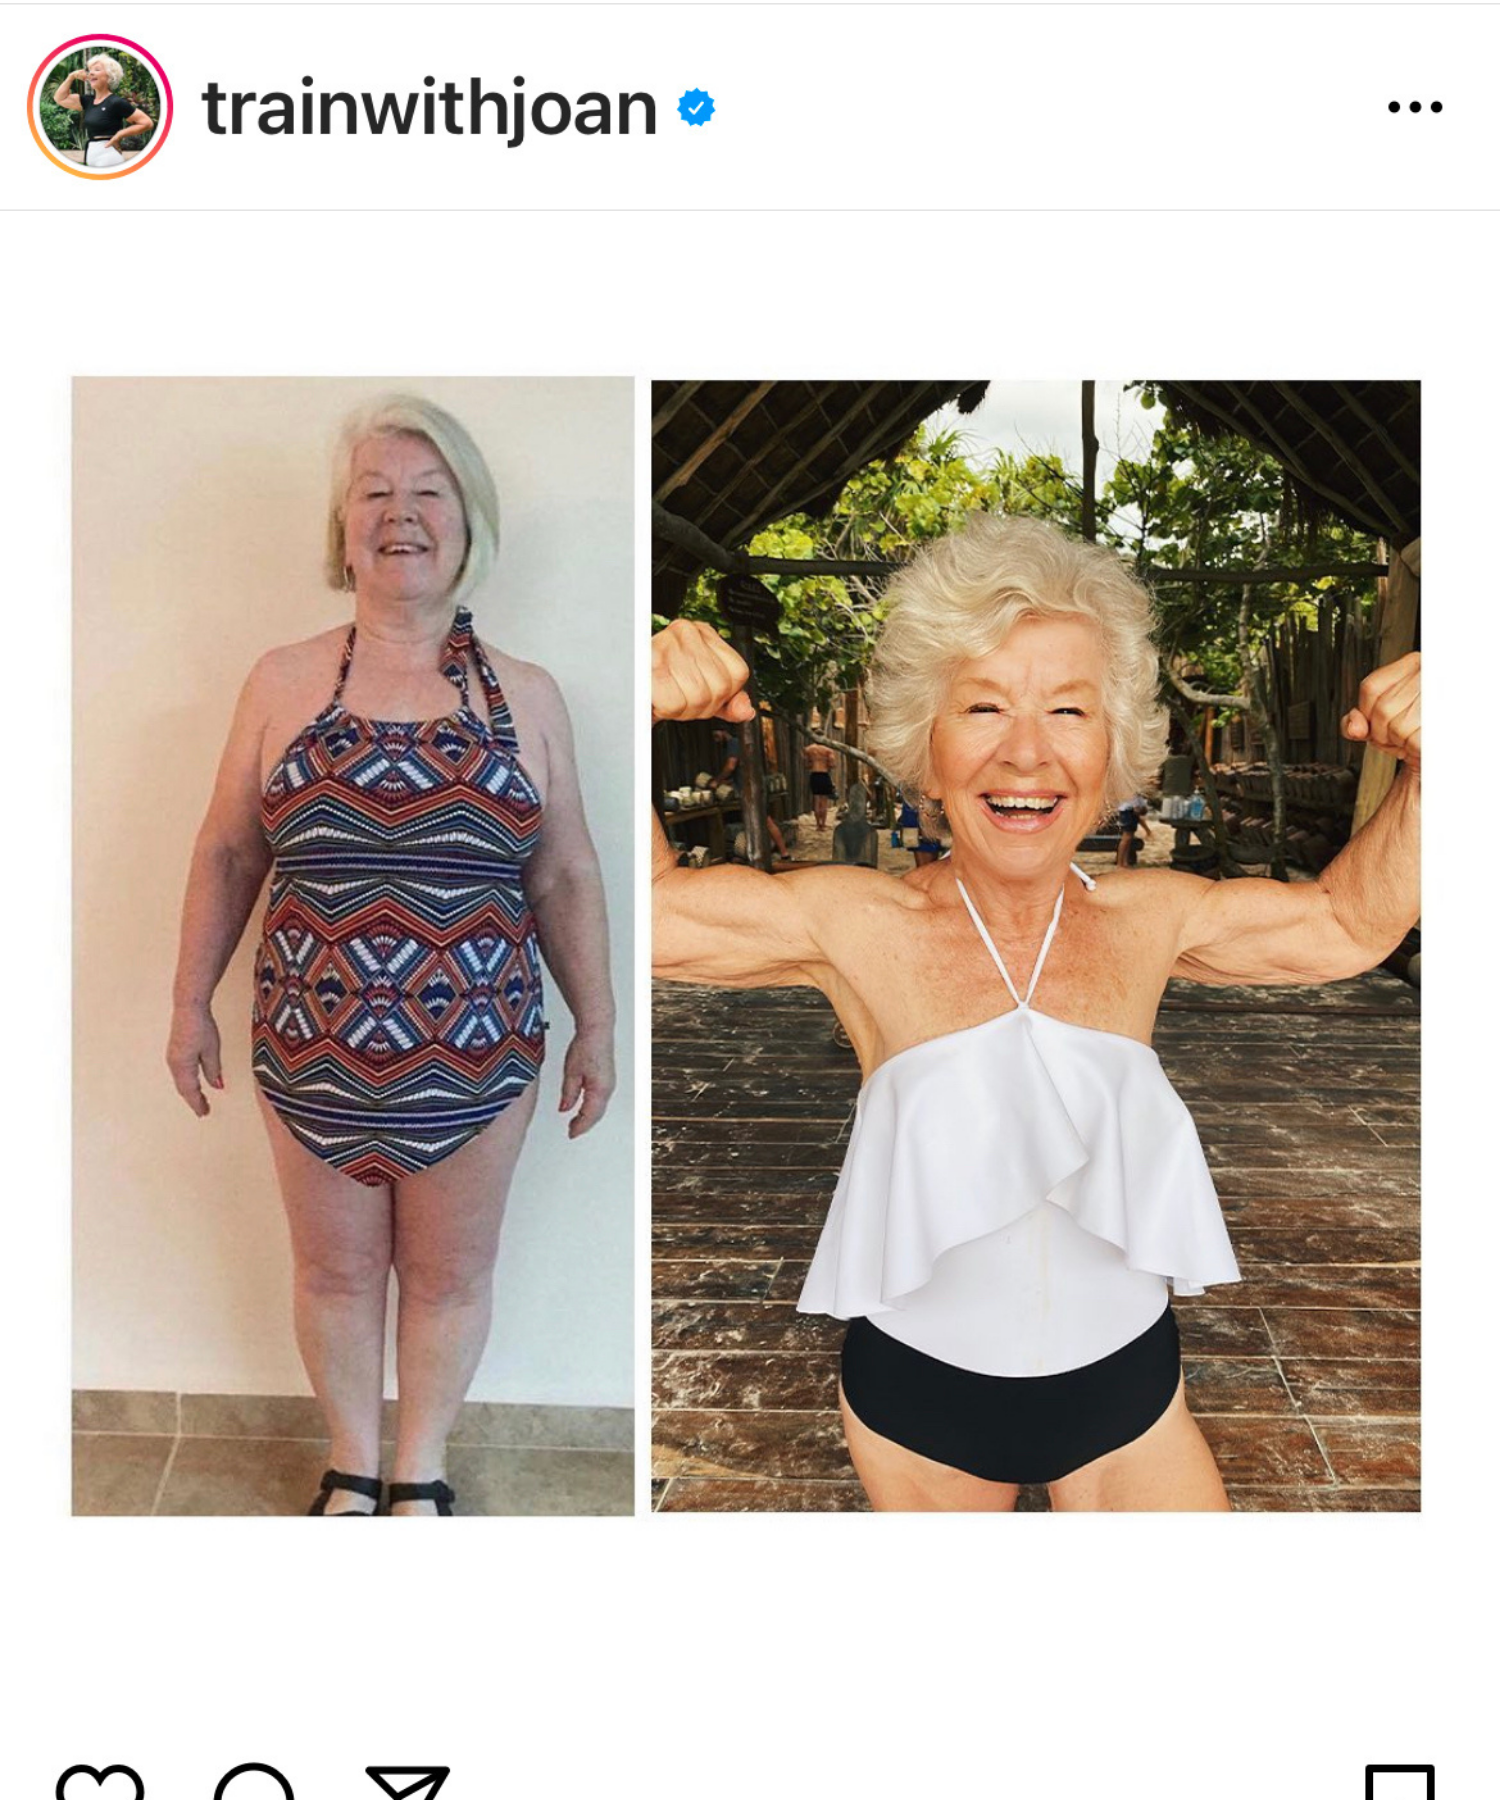 Joan McDonald is proof that you are never too old to get in shape. This 74-year-old is an Instagram sensation with over 1 million followers!